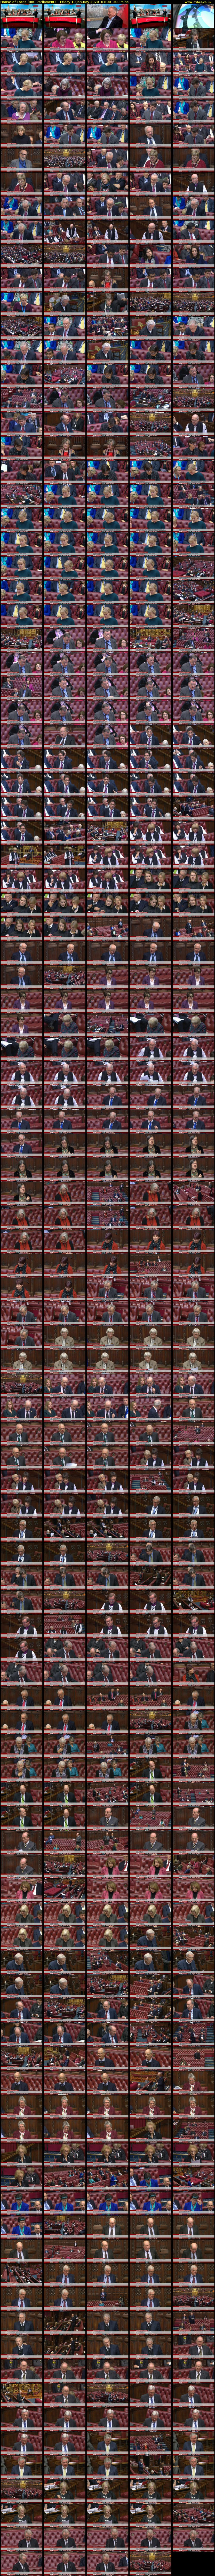 House of Lords (BBC Parliament) Friday 10 January 2020 01:00 - 06:00